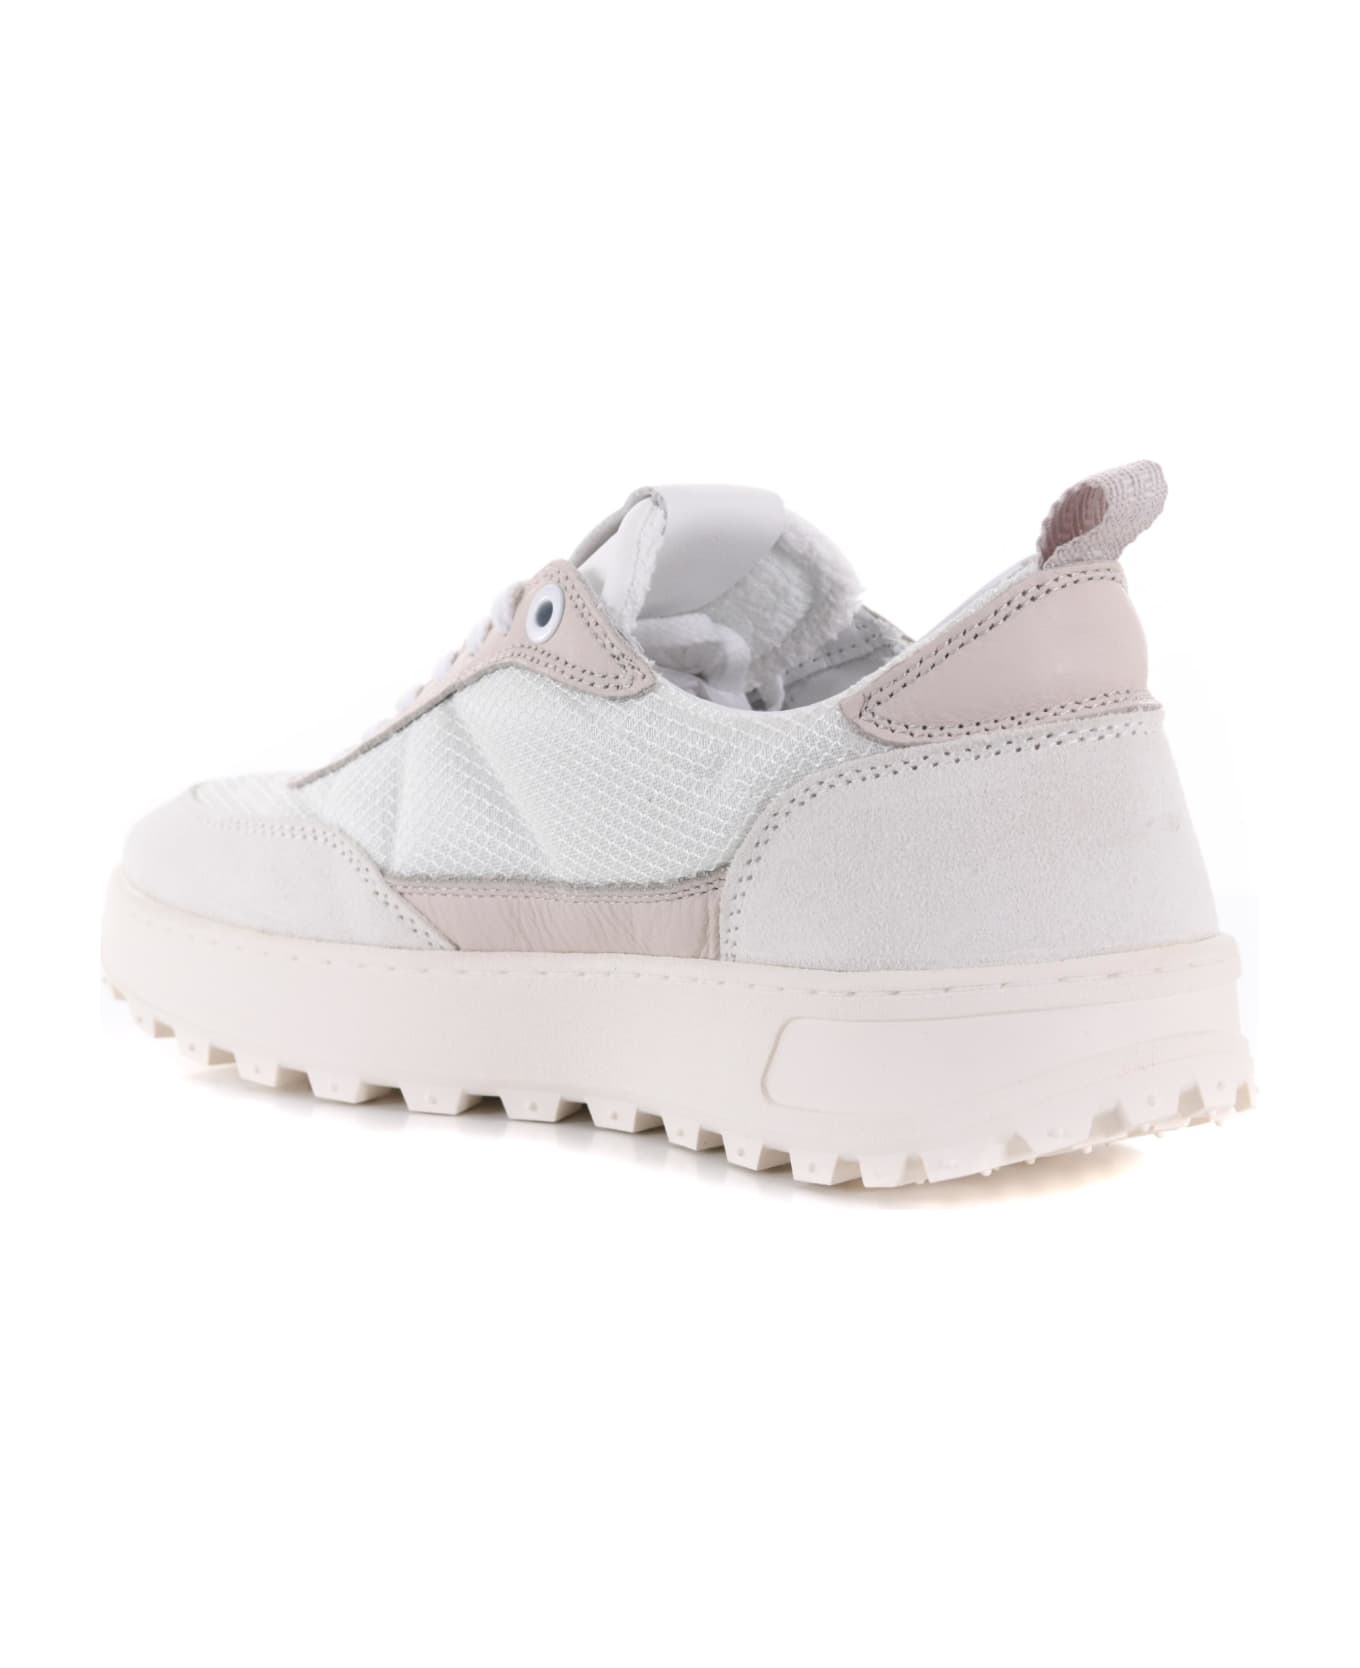 D.A.T.E. Sneakers "kdue Hybrid" In Leather And Nylon - Ghiaccio/bianco スニーカー